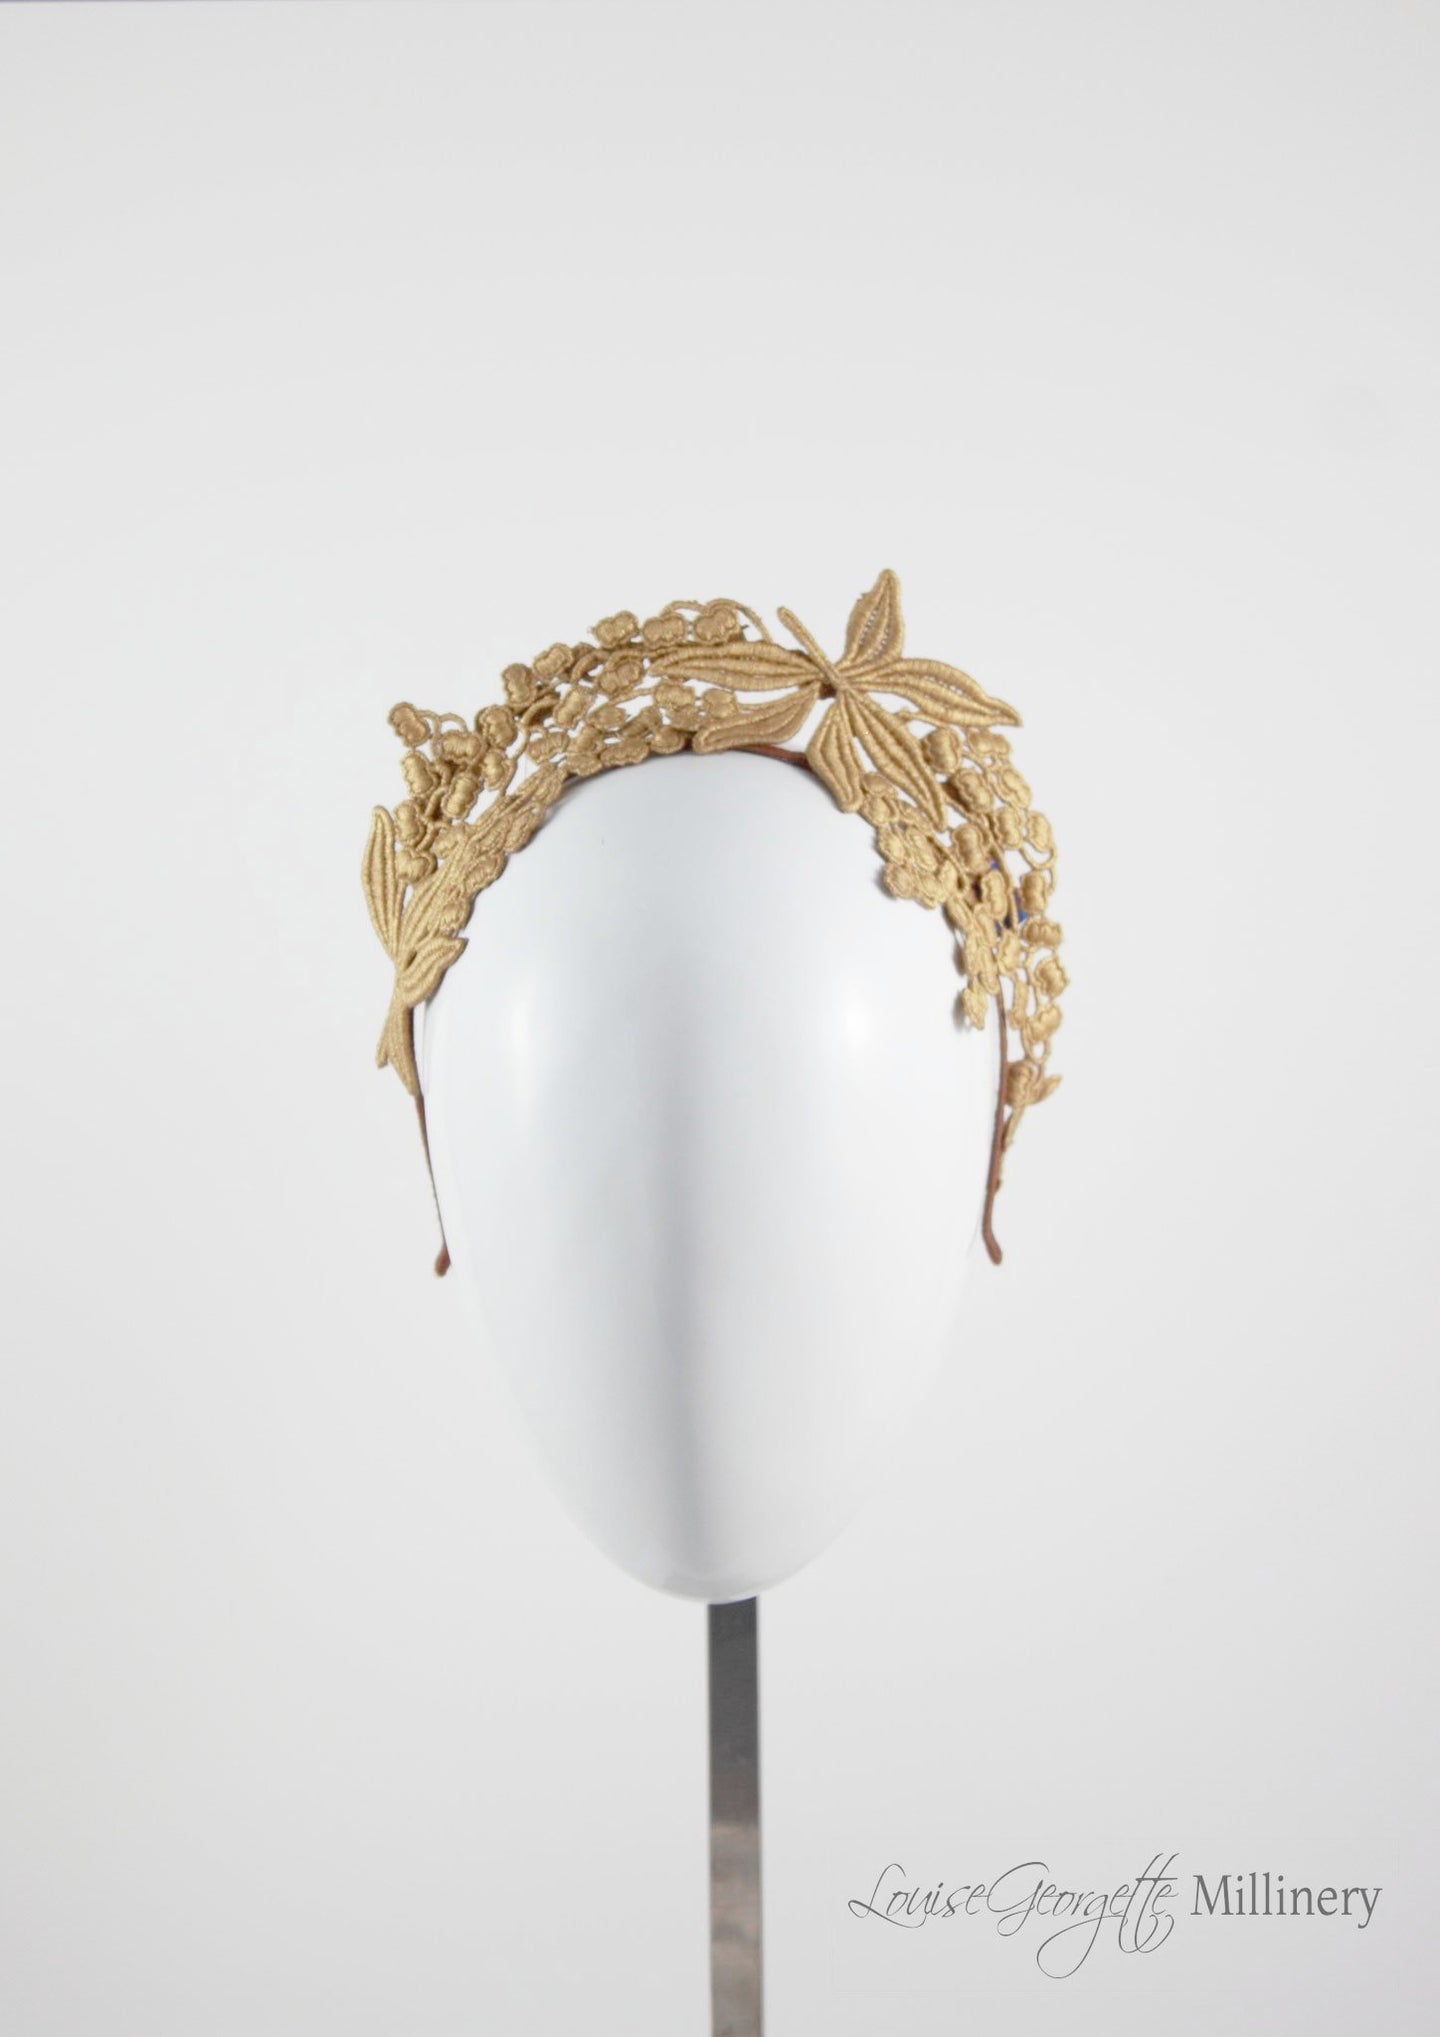 Beautiful tiara style gold lace headband. Suitable for racing events, brides and bridesmaids. Front view. 